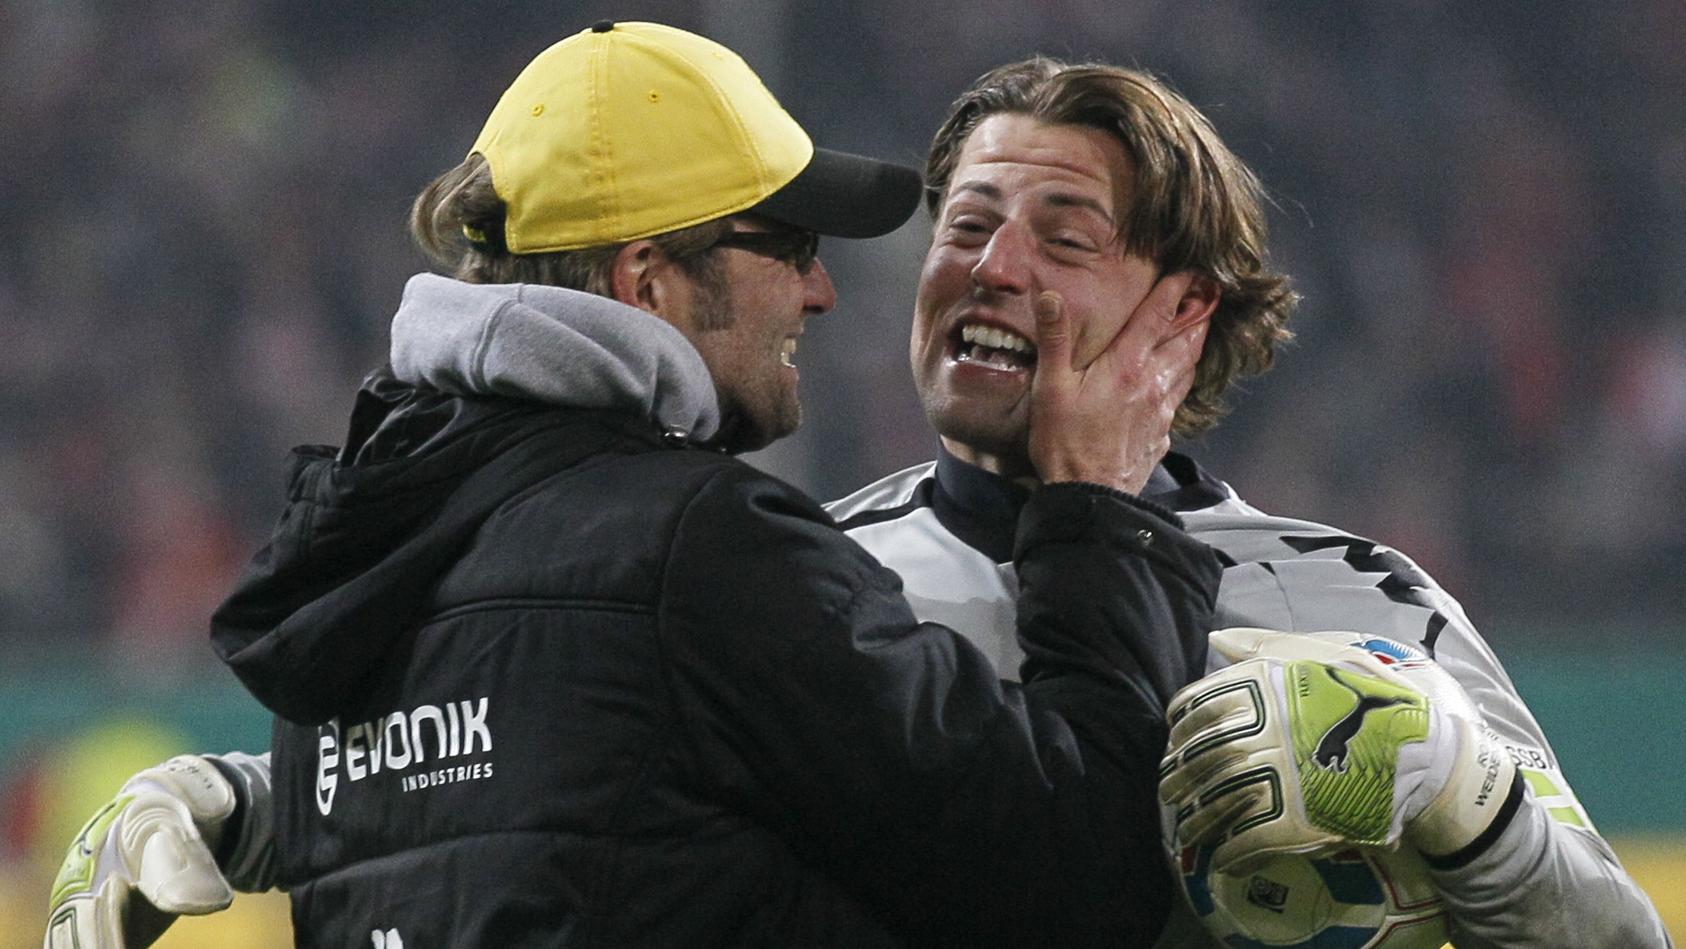 Borussia Dortmund's goal keeper Weidenfeller celebrates together with coach Klopp after beating Fortuna Duesseldorf in a penalty shoot-out in their German soccer cup DFB Pokal match in the western German city of Duesseldorf